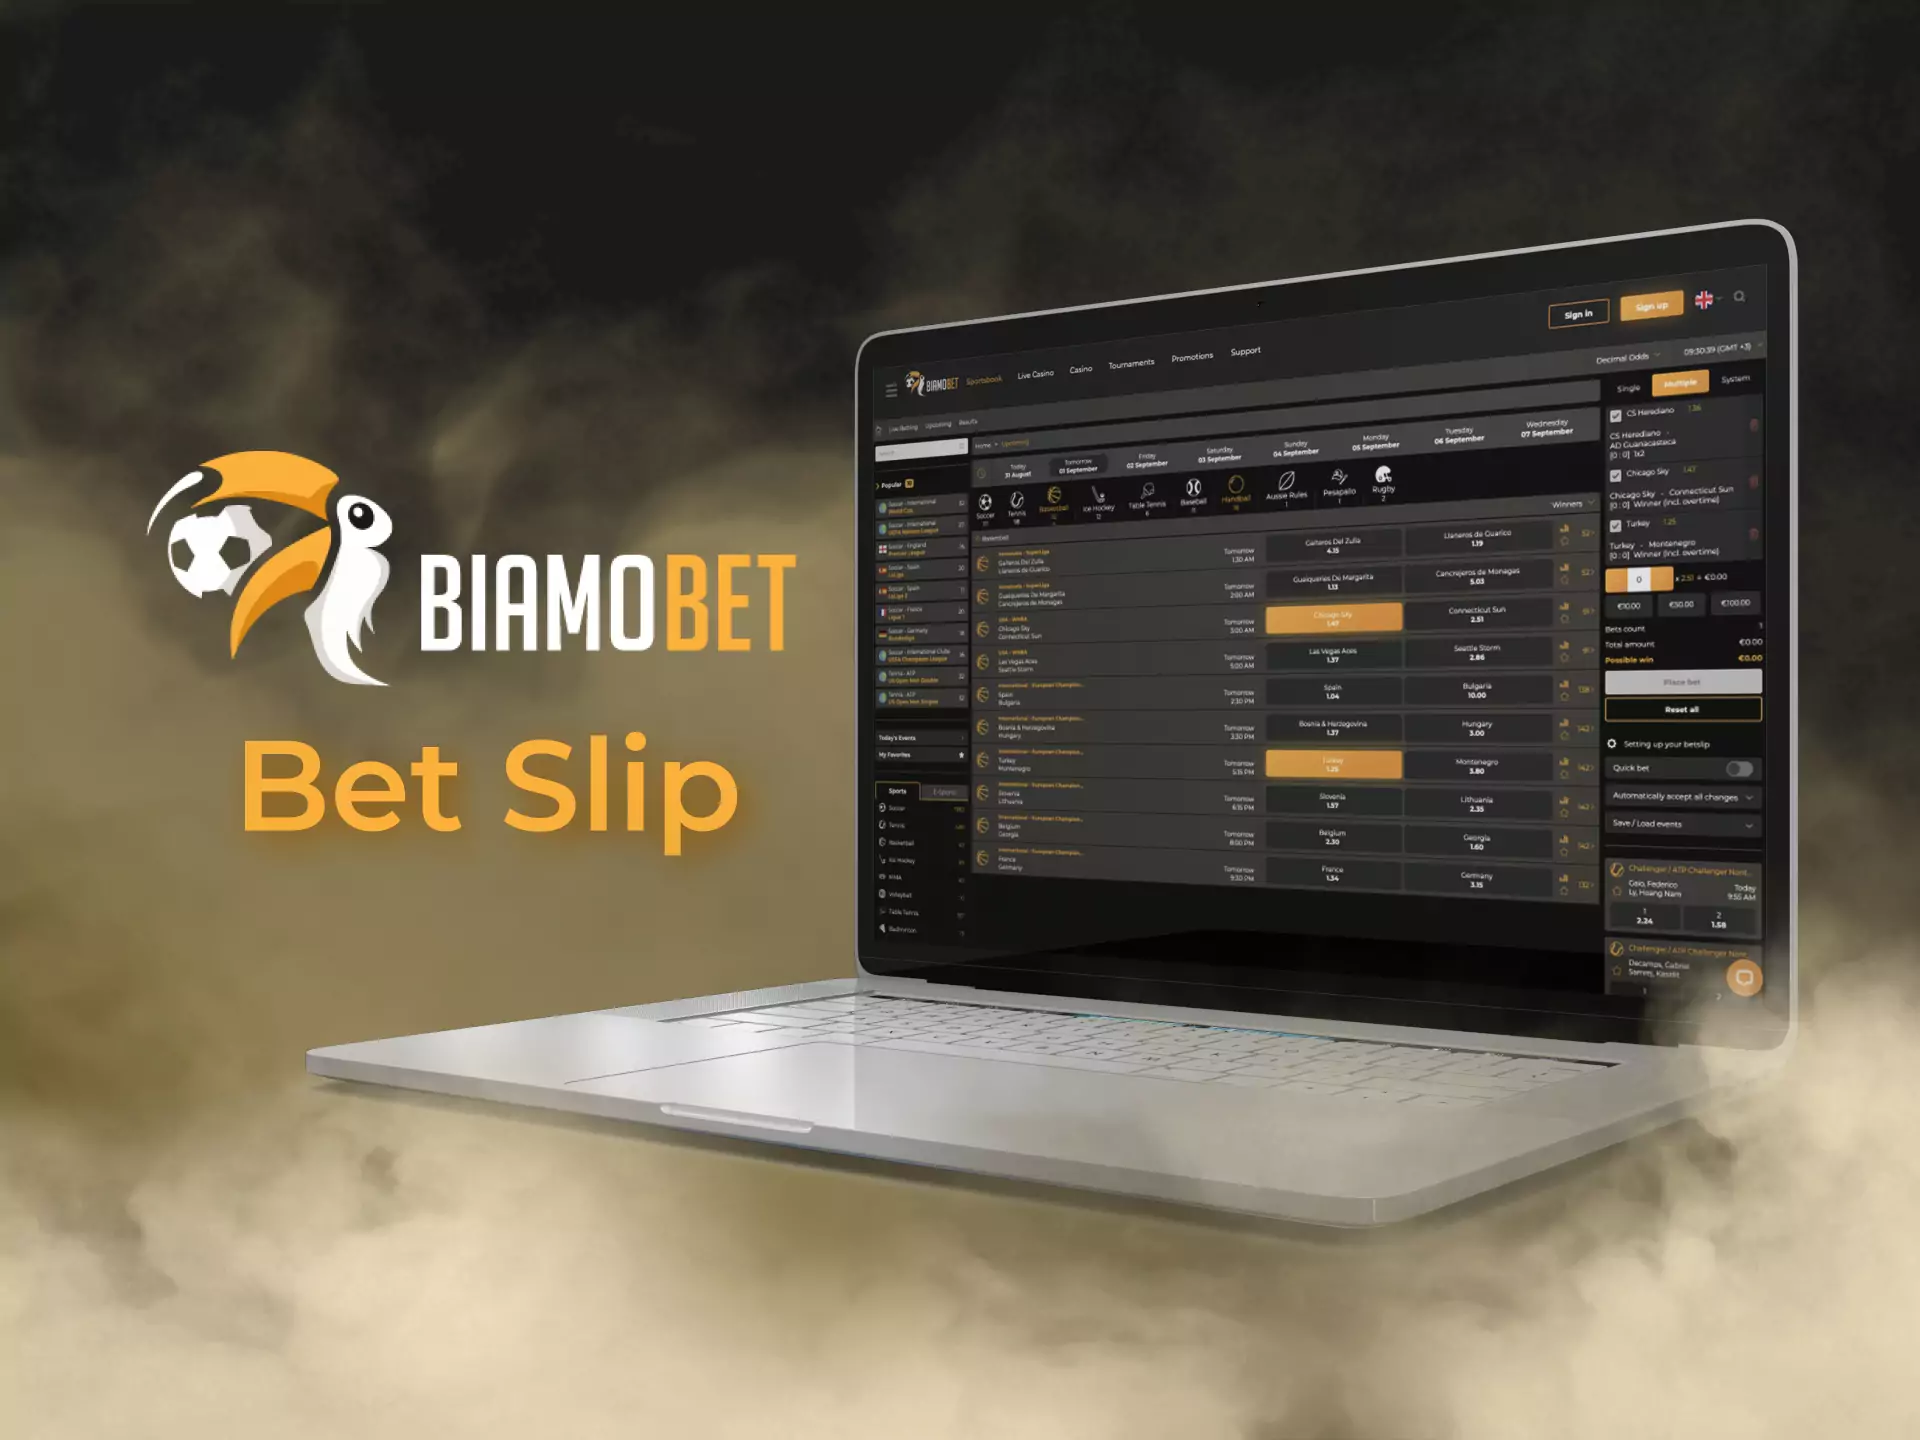 In the bet slip, you can follow and combine your bets on Biamobet.